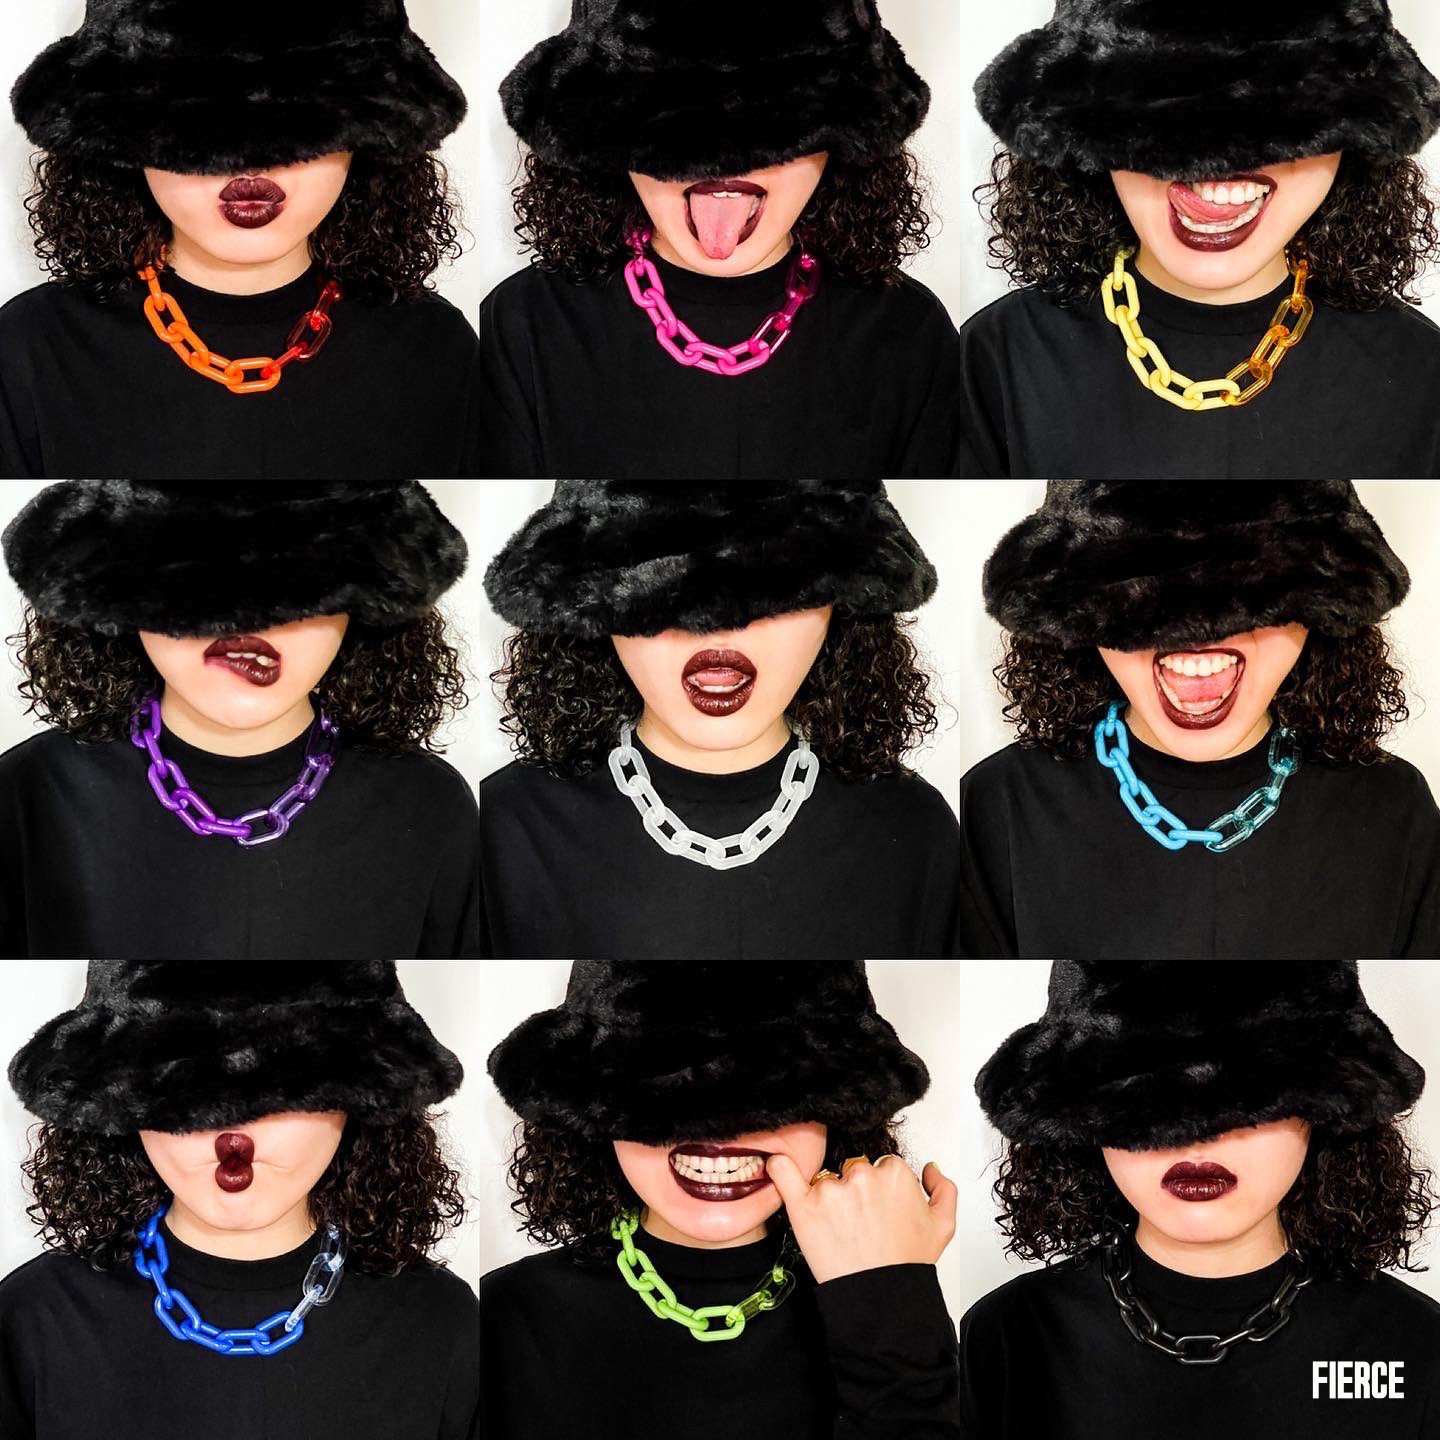 Colourful unisex chains from Hong Kong fashion brand Fierce.